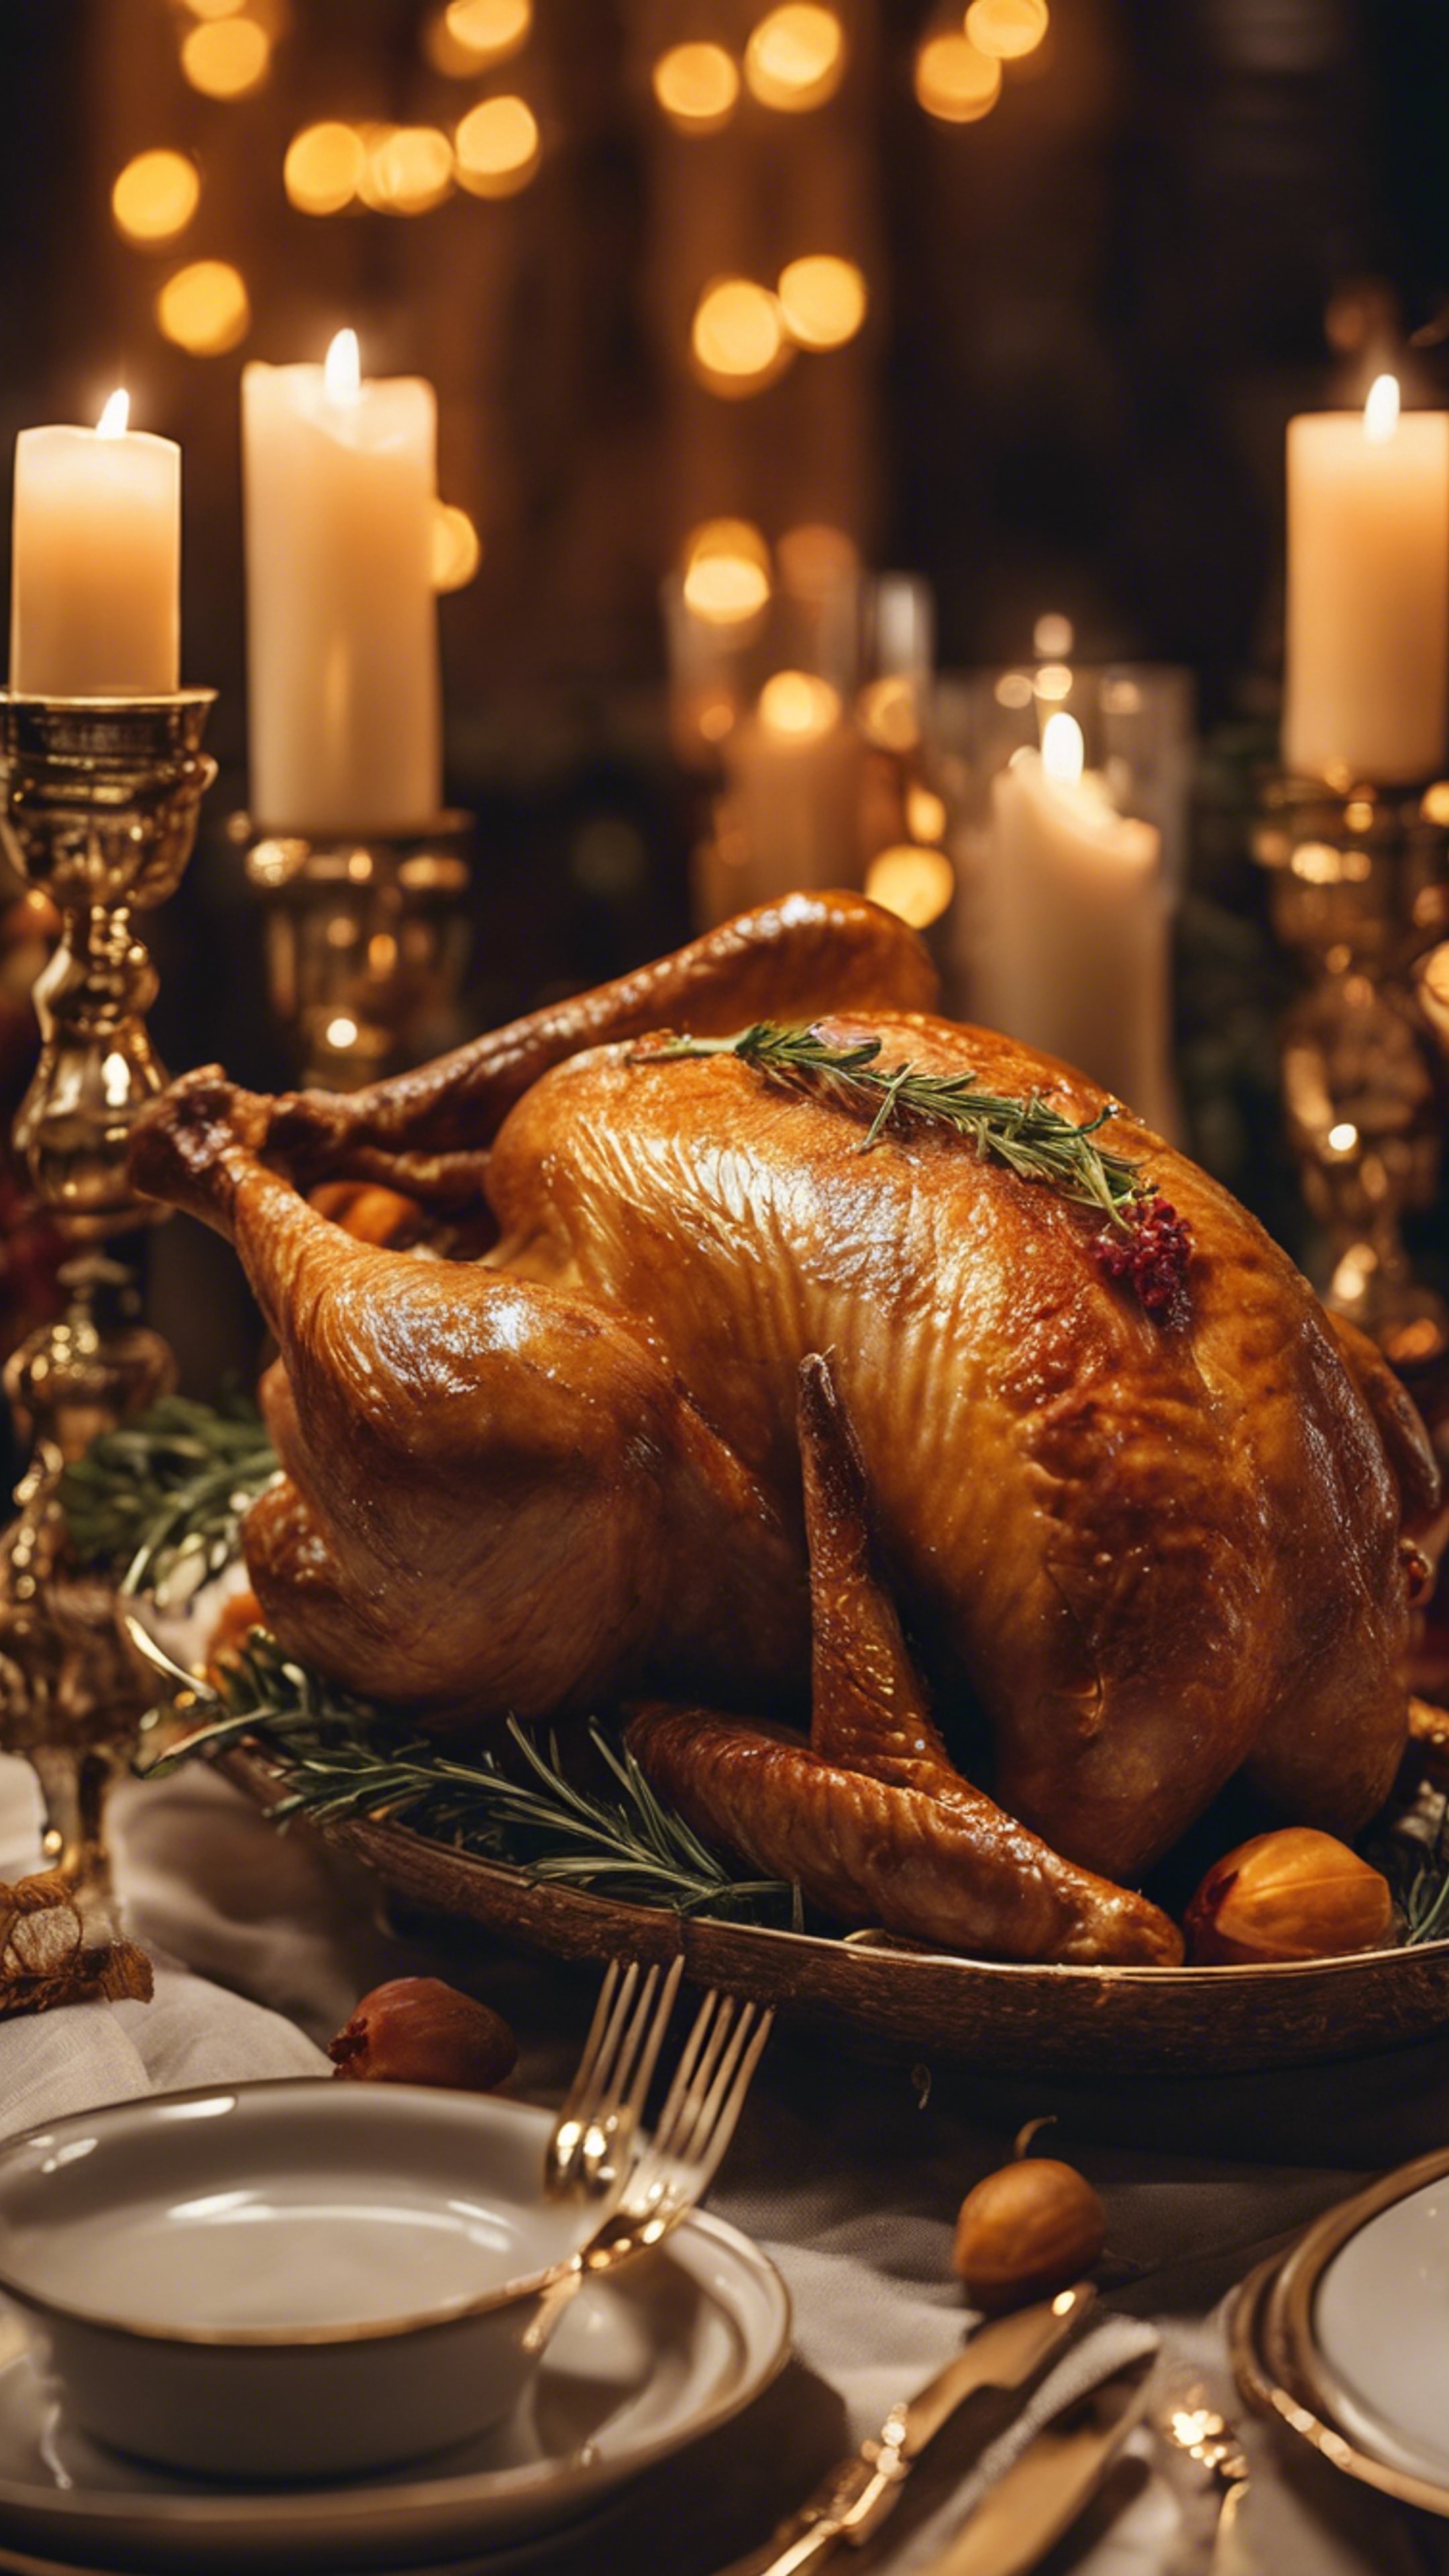 A golden turkey with crispy skin, garnished with rosemary sprigs, placed on a beautifully decorated Thanksgiving table surrounded by candlelight.壁紙[a315f5af56014eb0b6e0]